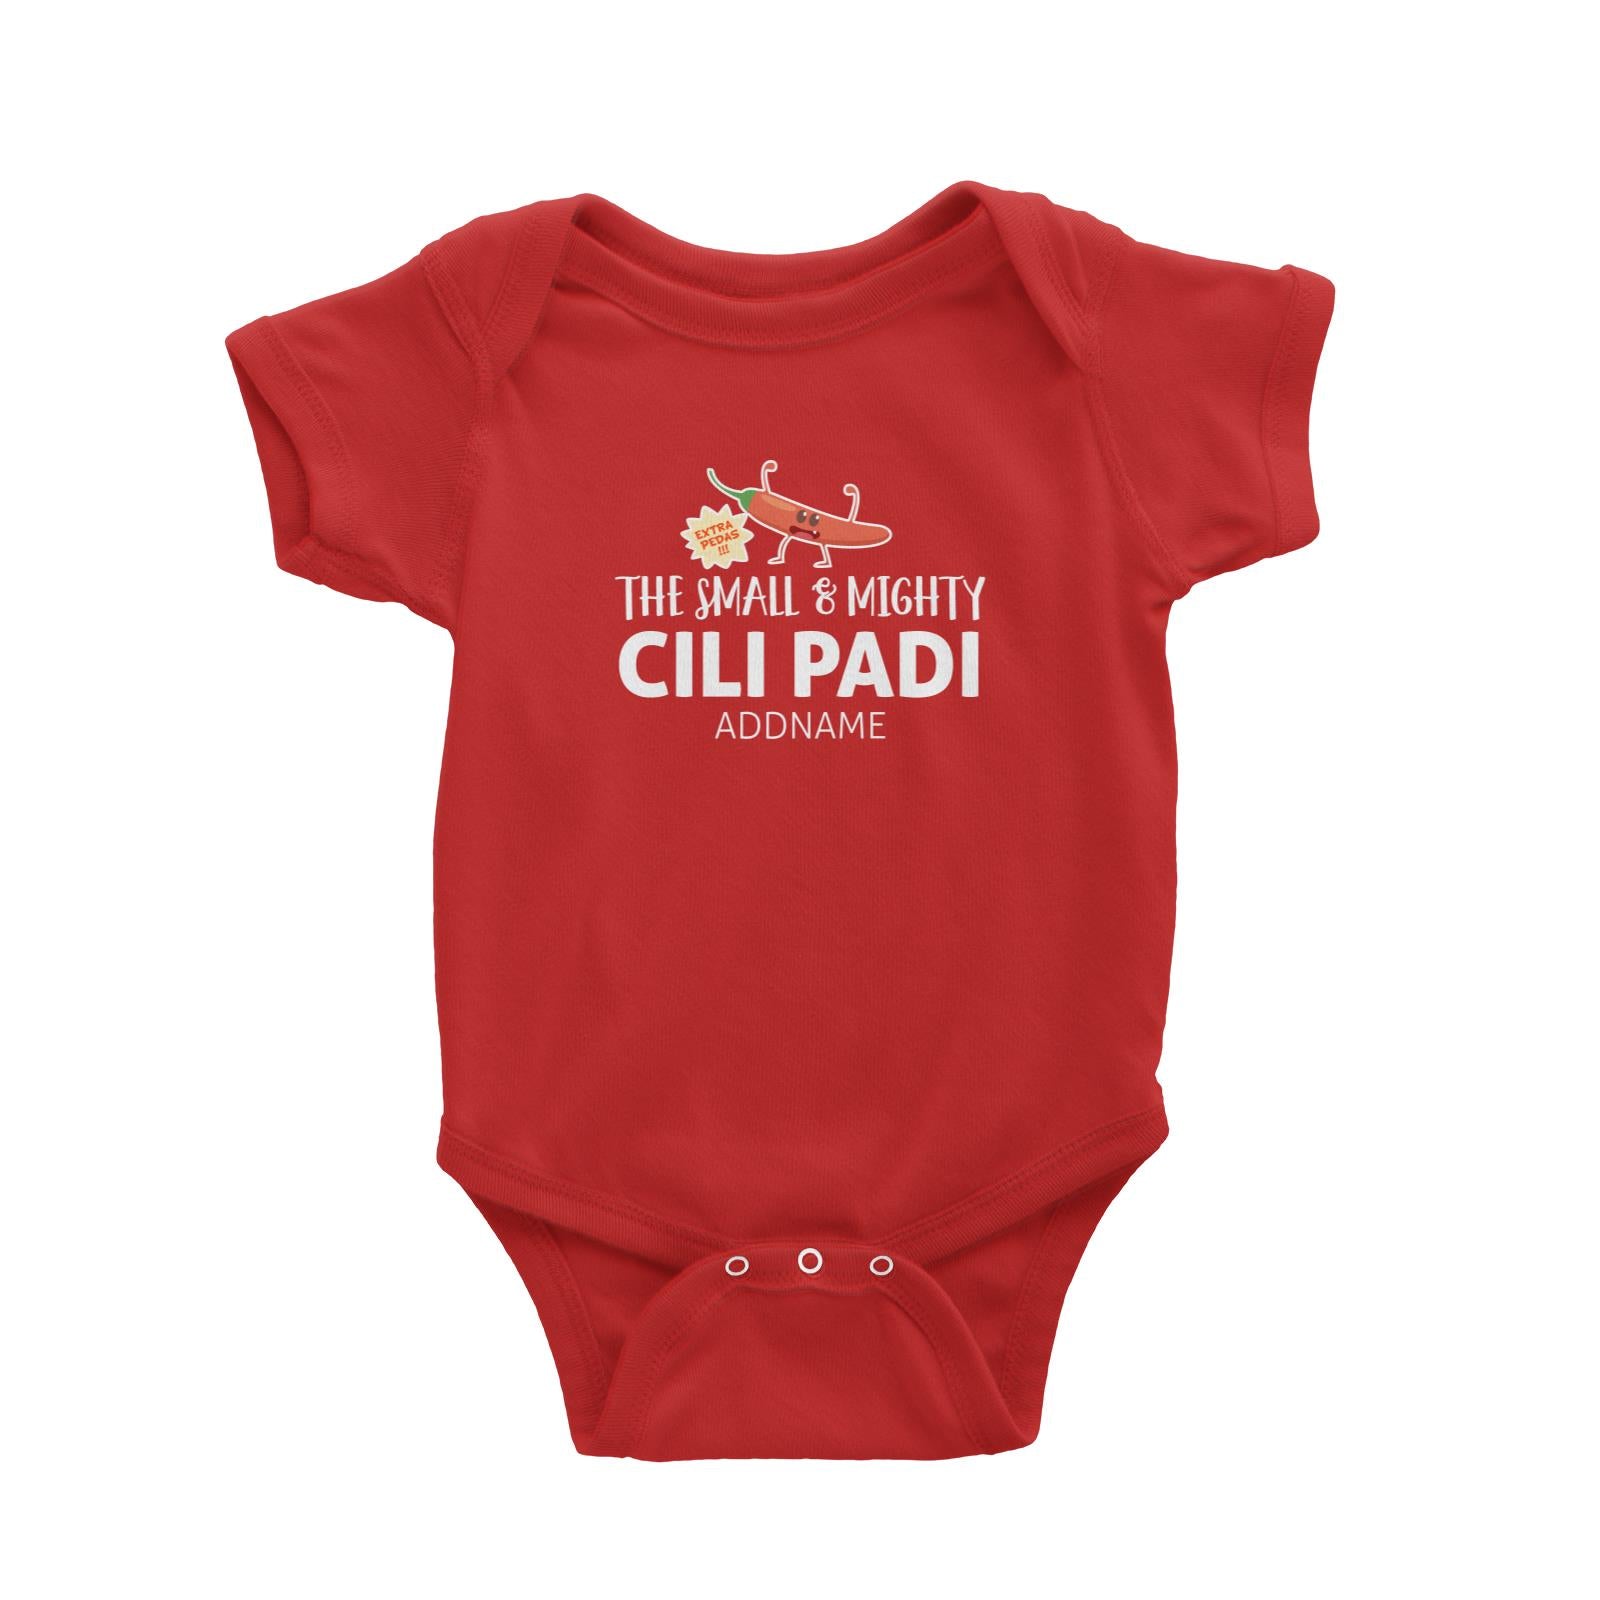 The Small and Mighty Cili Padi Extra Pedas Baby Romper